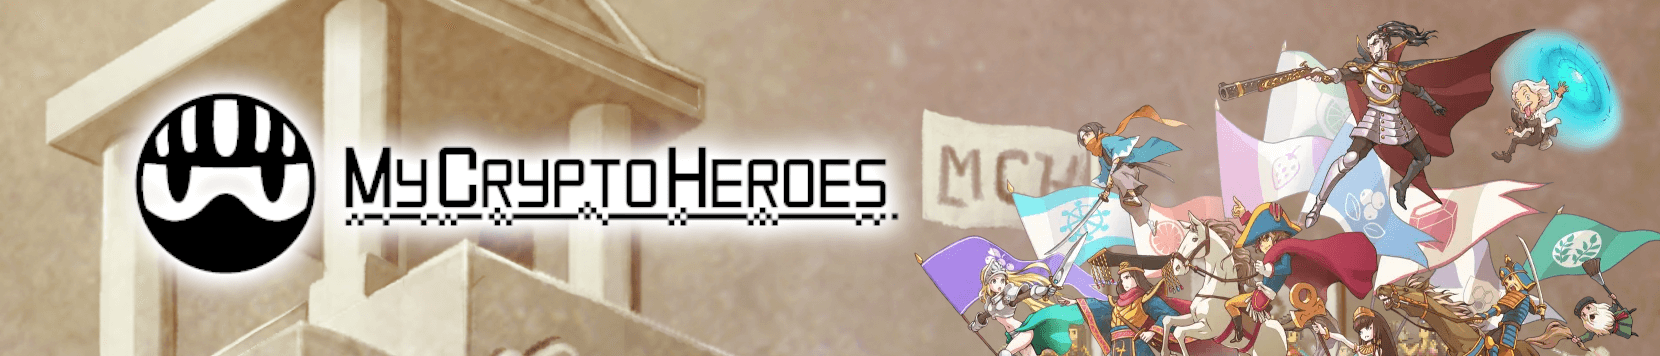 my crypto heroes banner.png